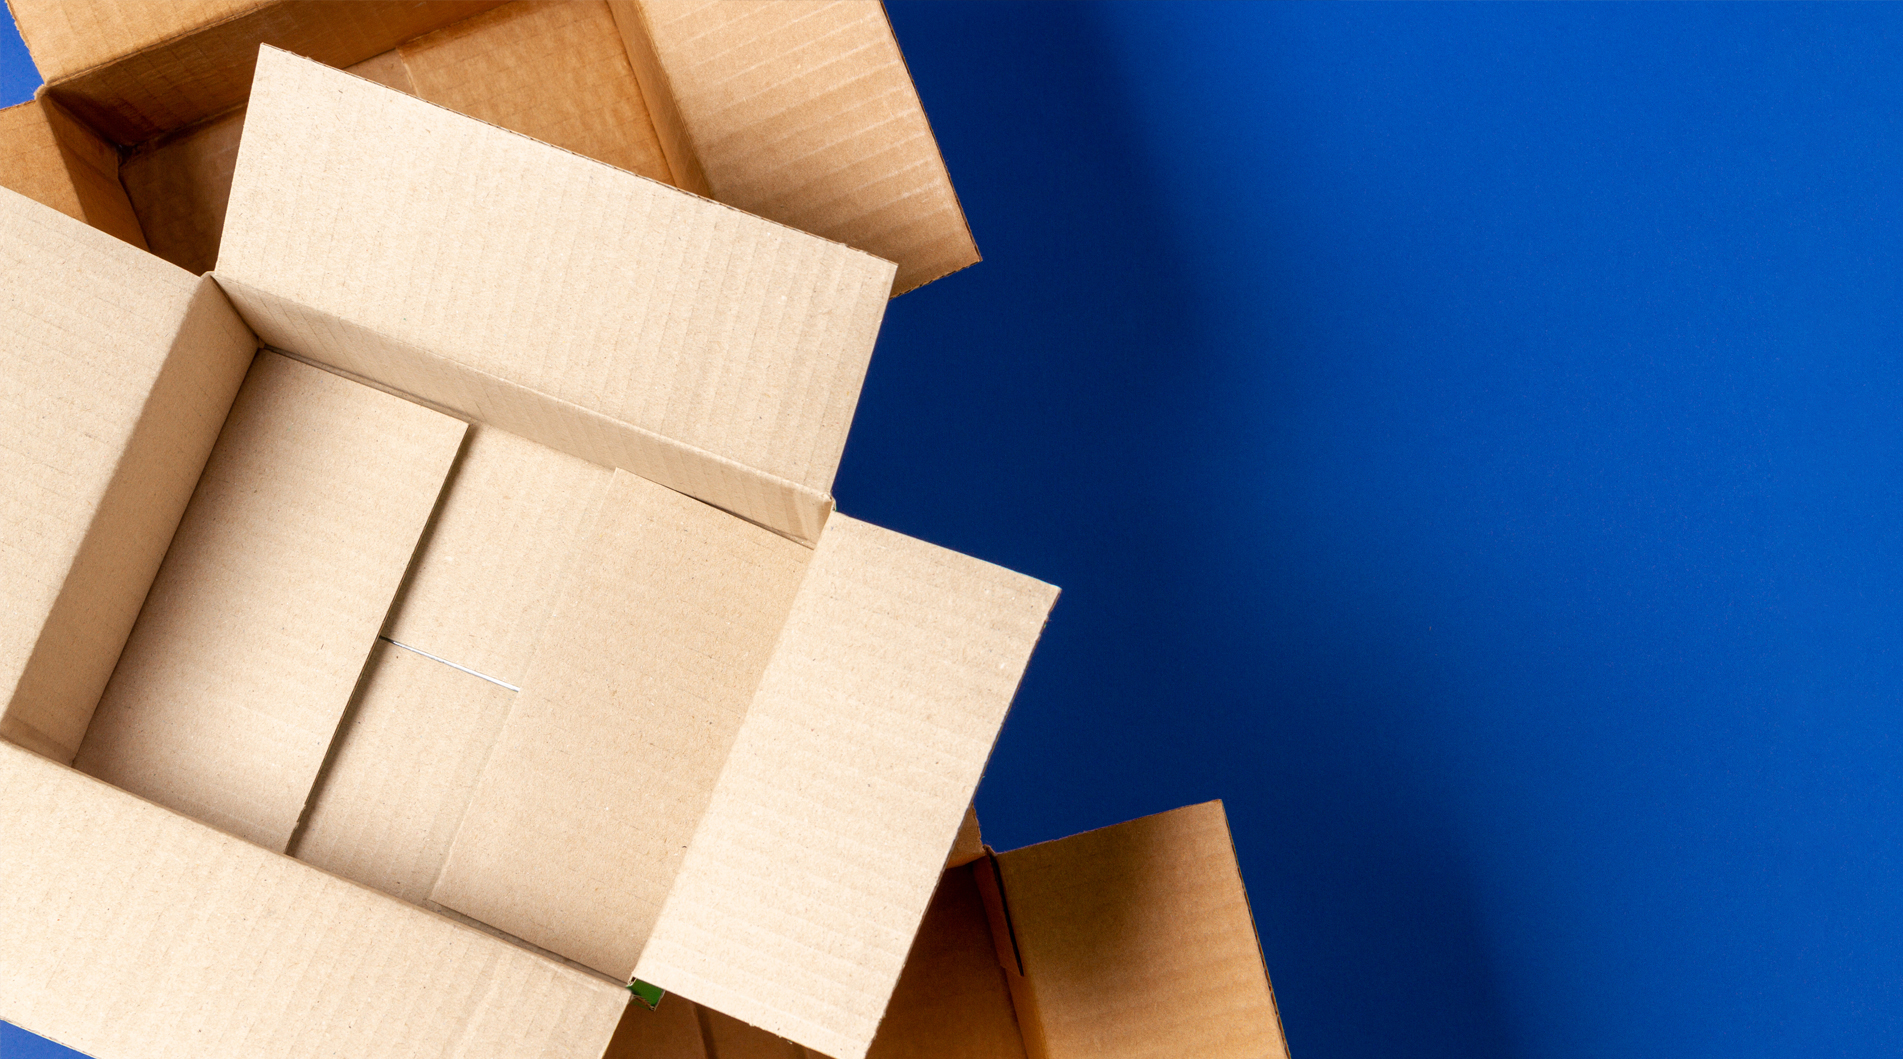 image showing empty open cardboard boxes on blue background